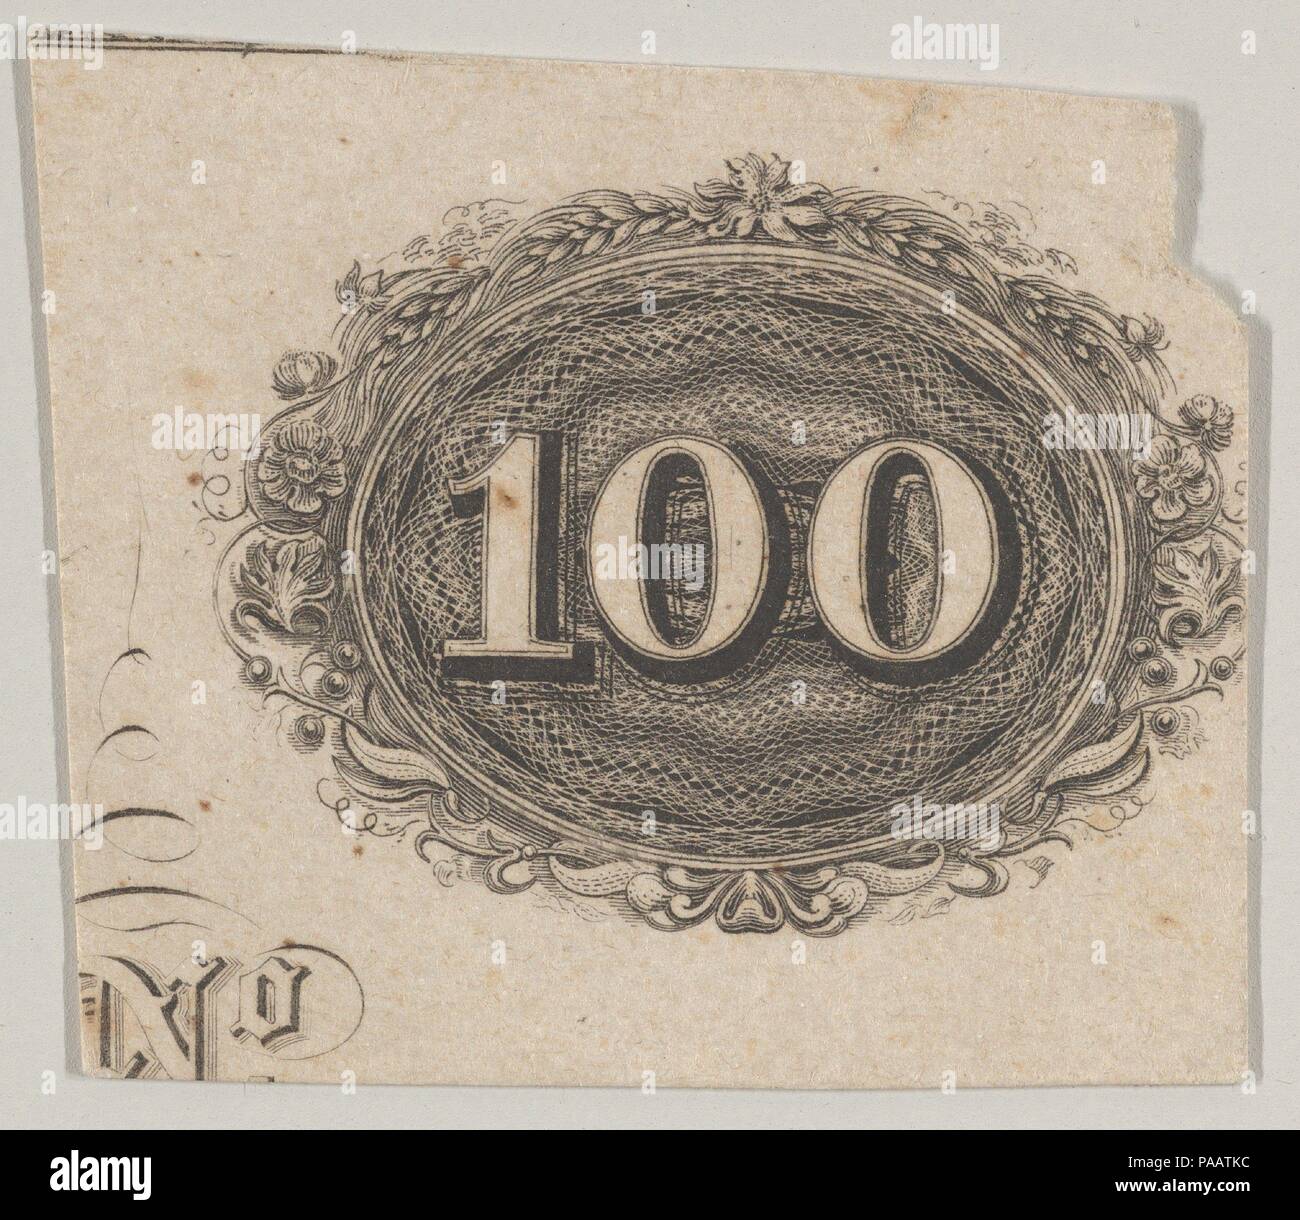 Banknote motif: the number 100 against an ornamental lathe work oval resembling woven rope with a border of grain, flowers and berries. Artist: Associated with Cyrus Durand (American, 1787-1868). Dimensions: sheet: 1 3/8 x 1 9/16 in. (3.5 x 4 cm). Printer: Printed by A. B. & C. Durand & Company (American, active 1824-27); Printed by Durand, Perkins, and Company (New York). Date: ca. 1824-42. Museum: Metropolitan Museum of Art, New York, USA. Stock Photo